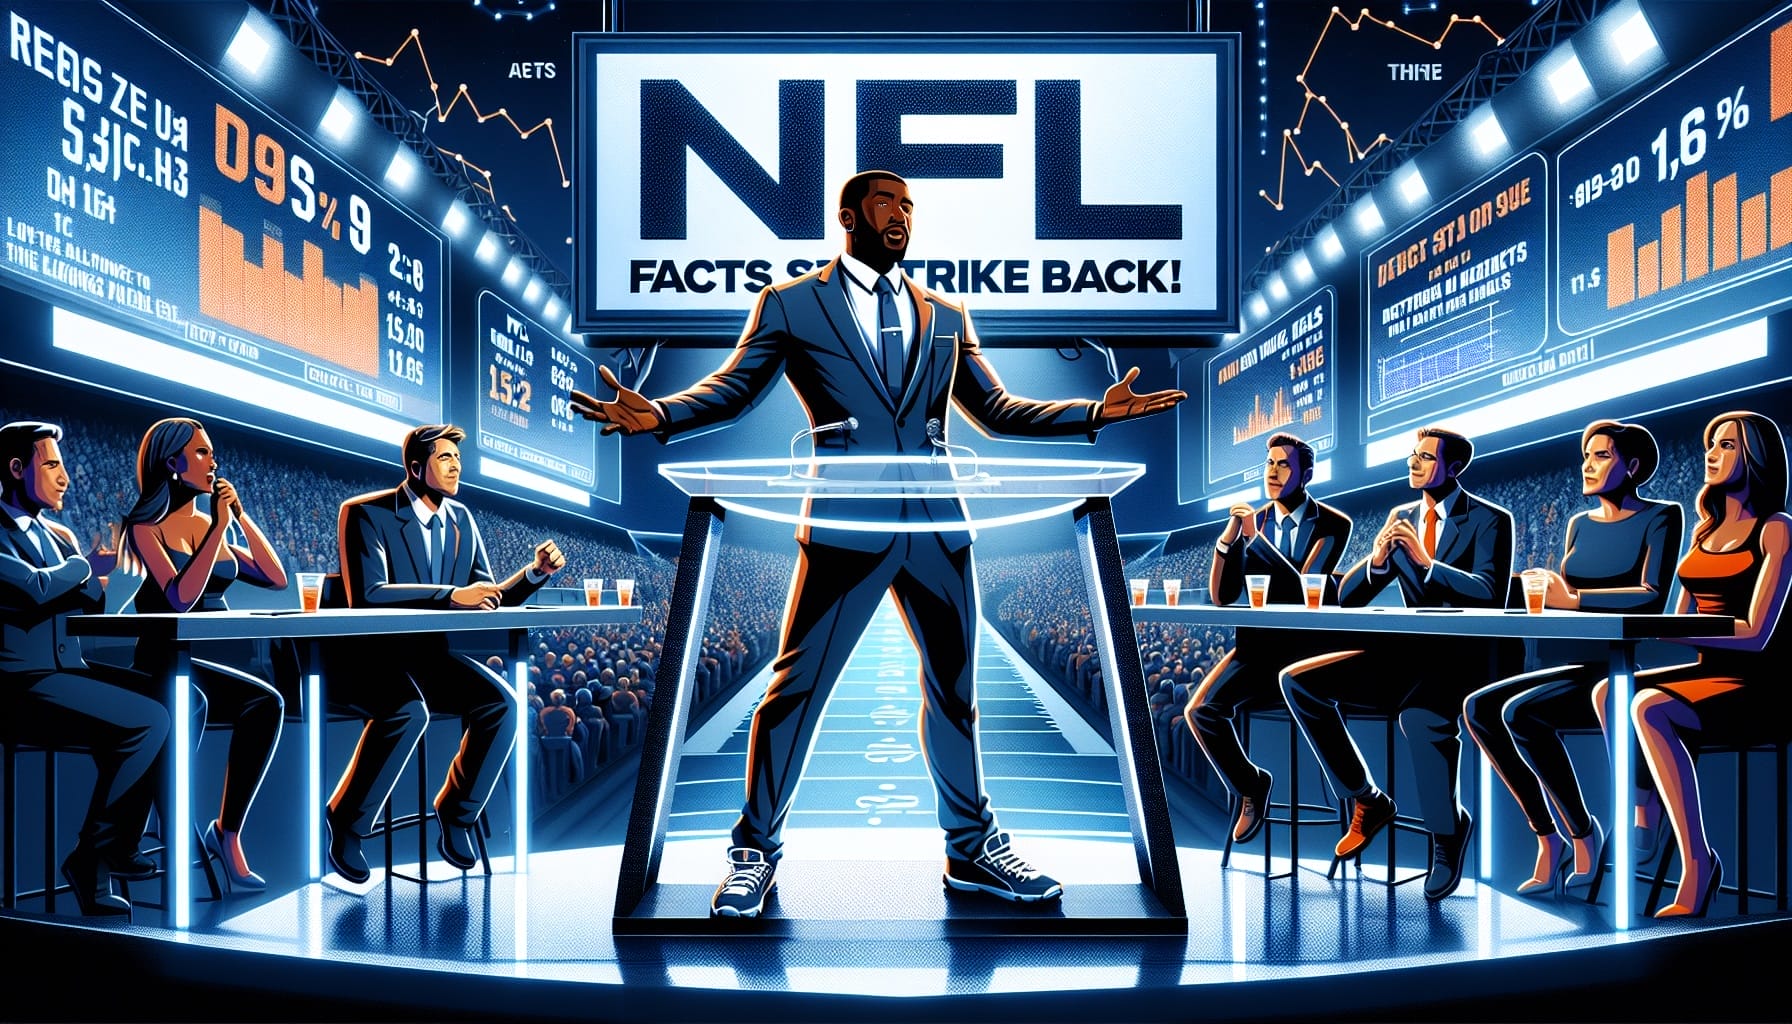 A man hosting a dynamic game show titled "NFL Facts Strike Back," separating fact from fiction with contestants and large digital scoreboards displaying statistics in a futuristic studio setting.